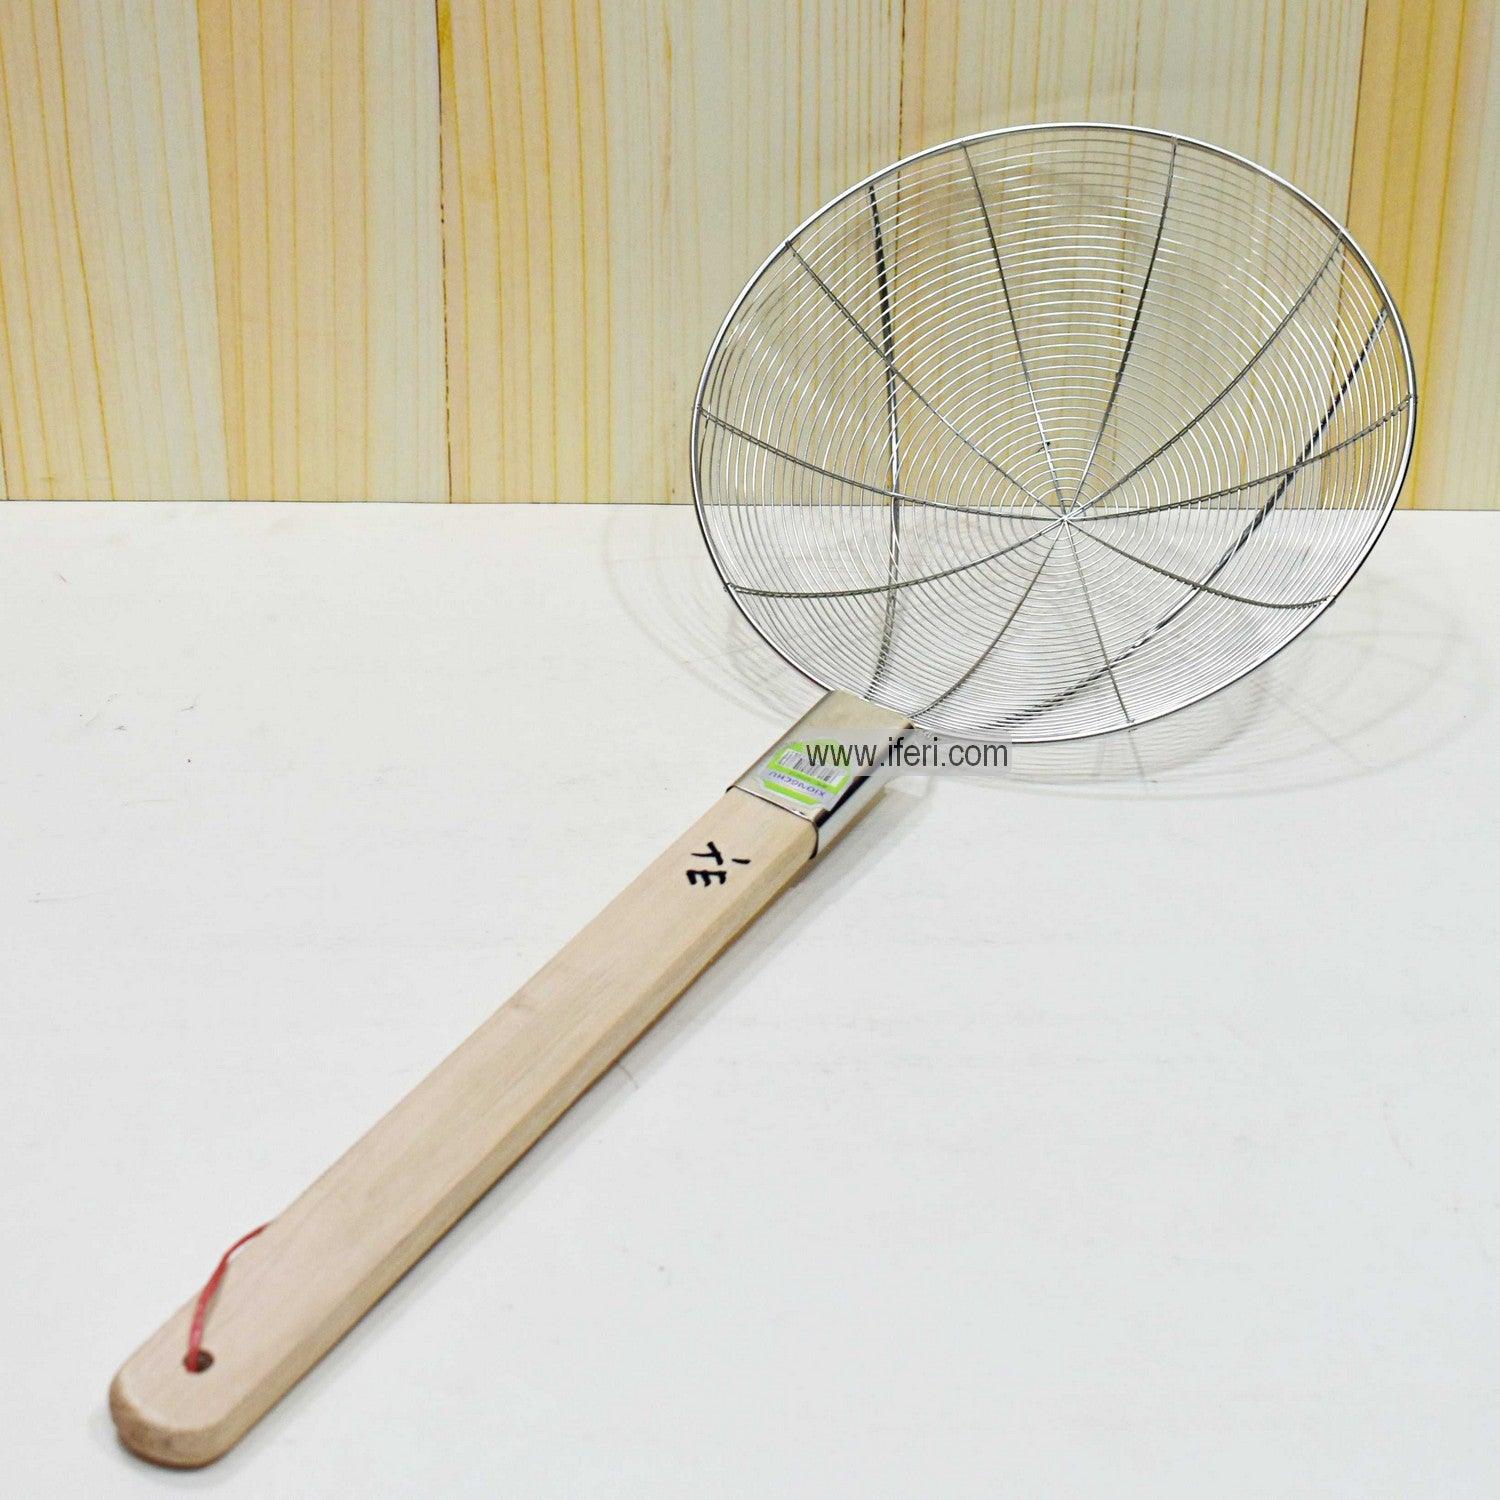 25 inch Stainless Steel Skimmer Spoon Colander Strainer for Cooking and Frying SN0694 Price in Bangladesh - iferi.com